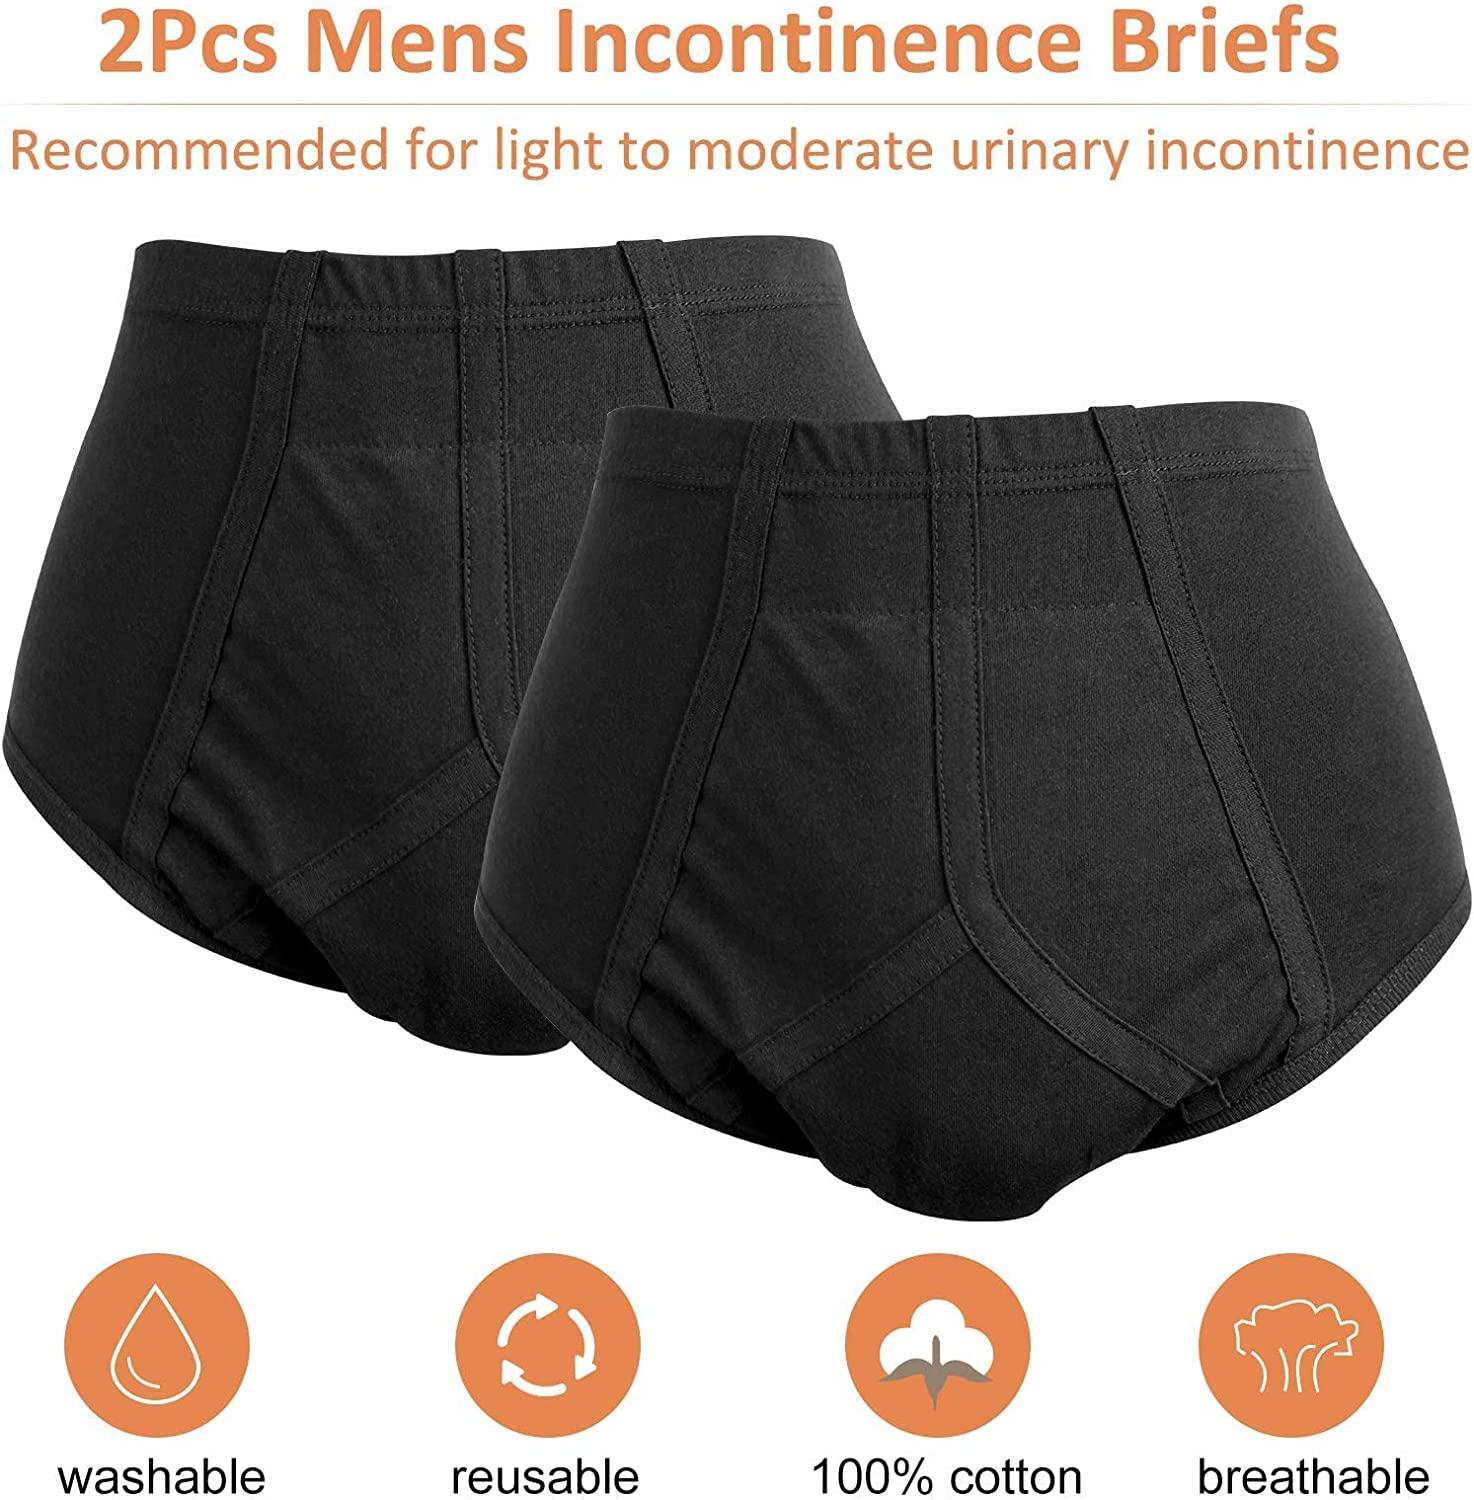 Mens Incontinence Underwear 2PCS Washable Urinary Briefs with Front  Absorbent Area Reusable Incontinence Brief for Men Breathable Urinary  Incontinence